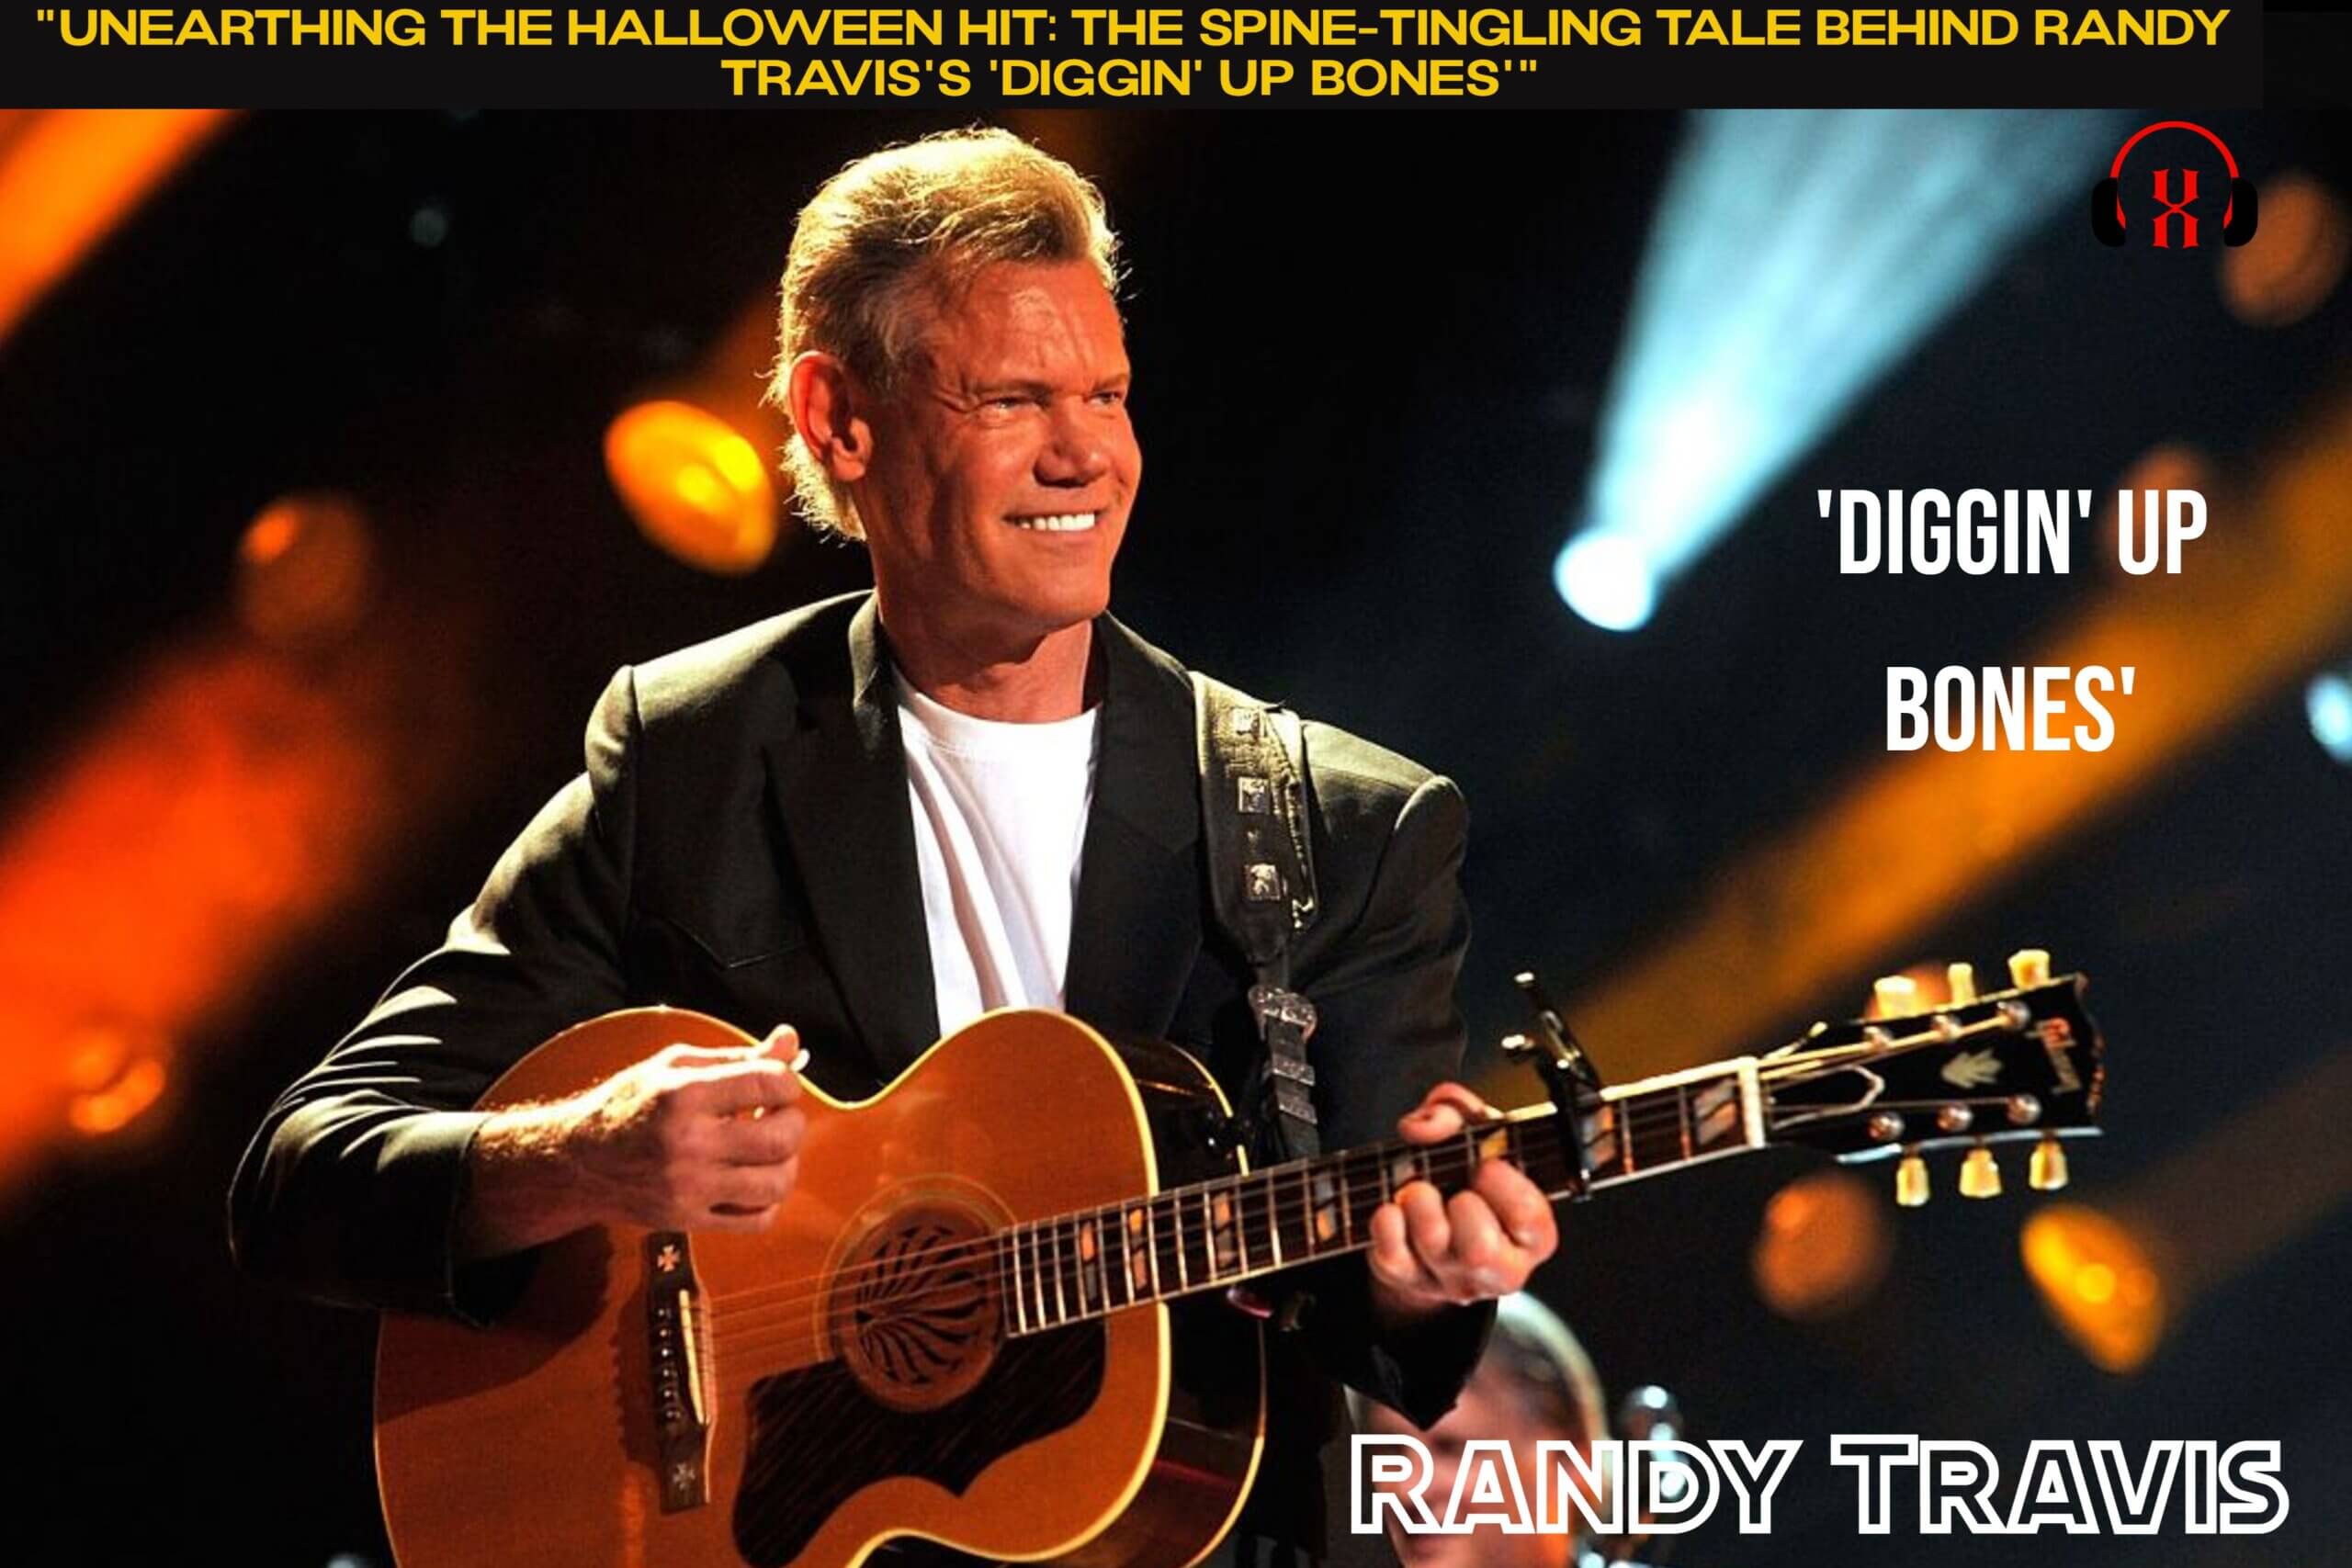 “Unearthing the Halloween Hit: The Spine-Tingling Tale Behind Randy Travis’s ‘Diggin’ Up Bones'”